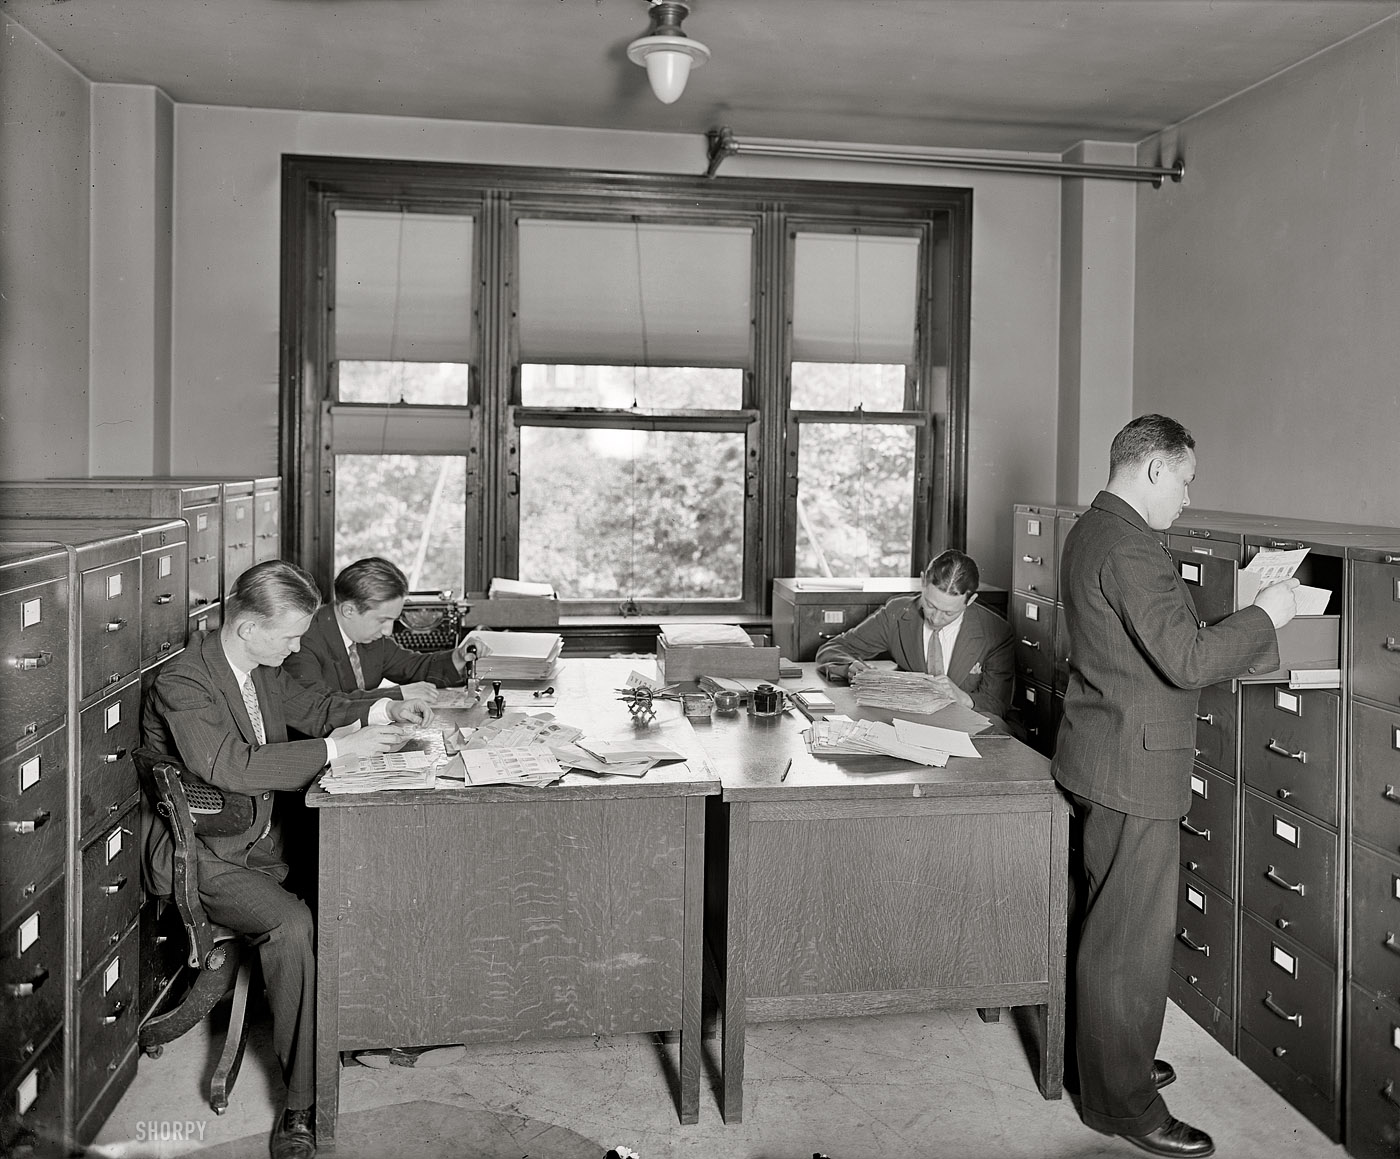 Washington, D.C., circa 1925. "Bureau of Identification, Department of Justice." National Photo Company Collection glass negative. View full size.